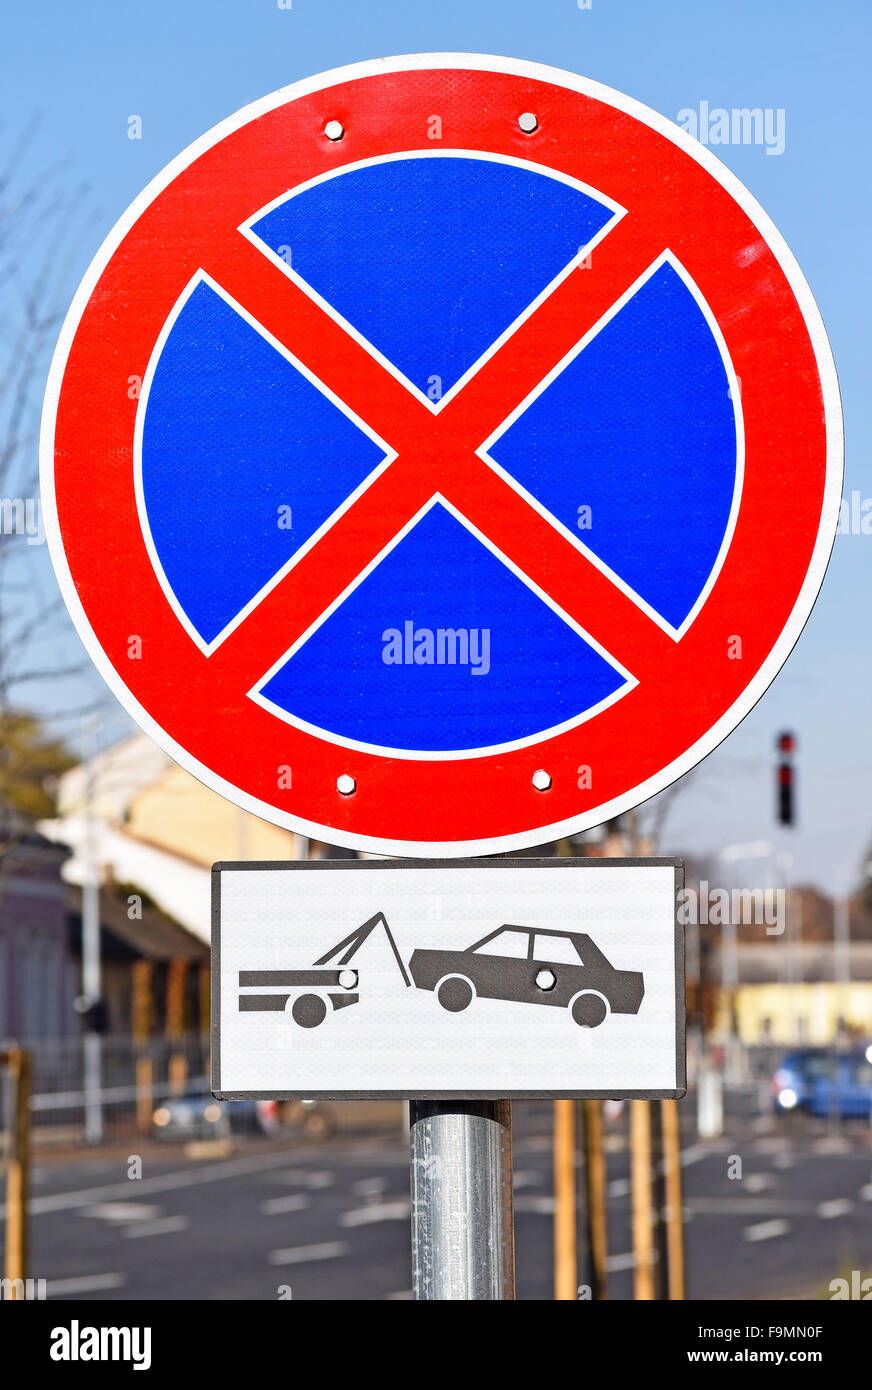 No stopping traffic sign Stock Photo